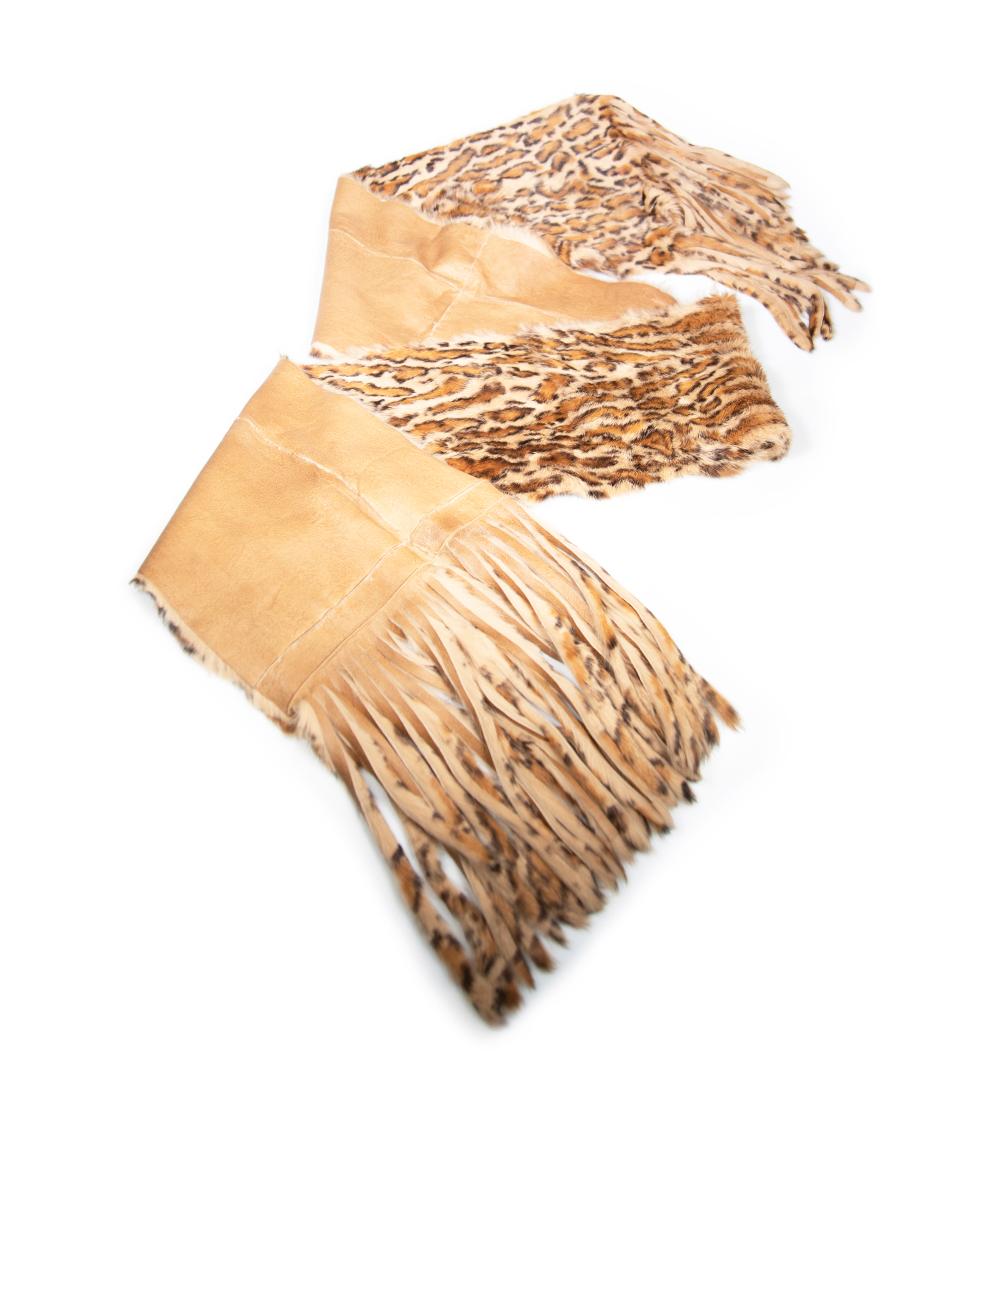 CONDITION is Very good. Hardly any visible wear to scarf is evident on this used Baya Paris designer resale item.
 
 
 
 Details
 
 
 Brown
 
 Fur
 
 Scarf
 
 Leopard print
 
 Fringe edge
 
 
 
 
 
 Composition
 
 EXTERIOR: Fur
 
 INTERIOR: Leather
